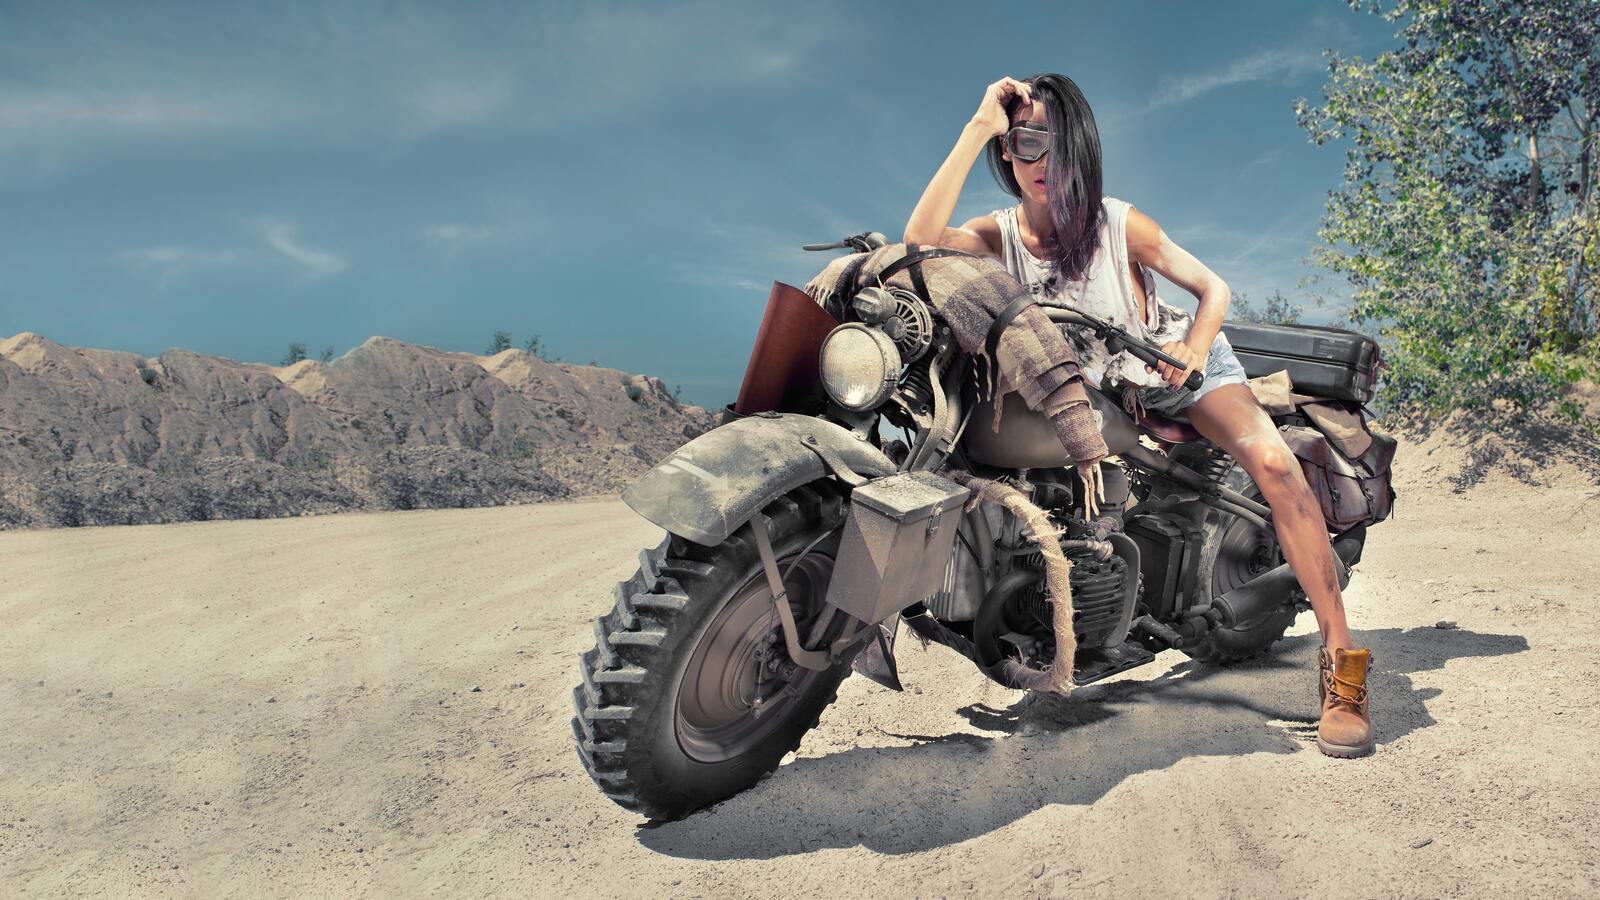 Free photo Girl poses in the desert on a vintage motorcycle